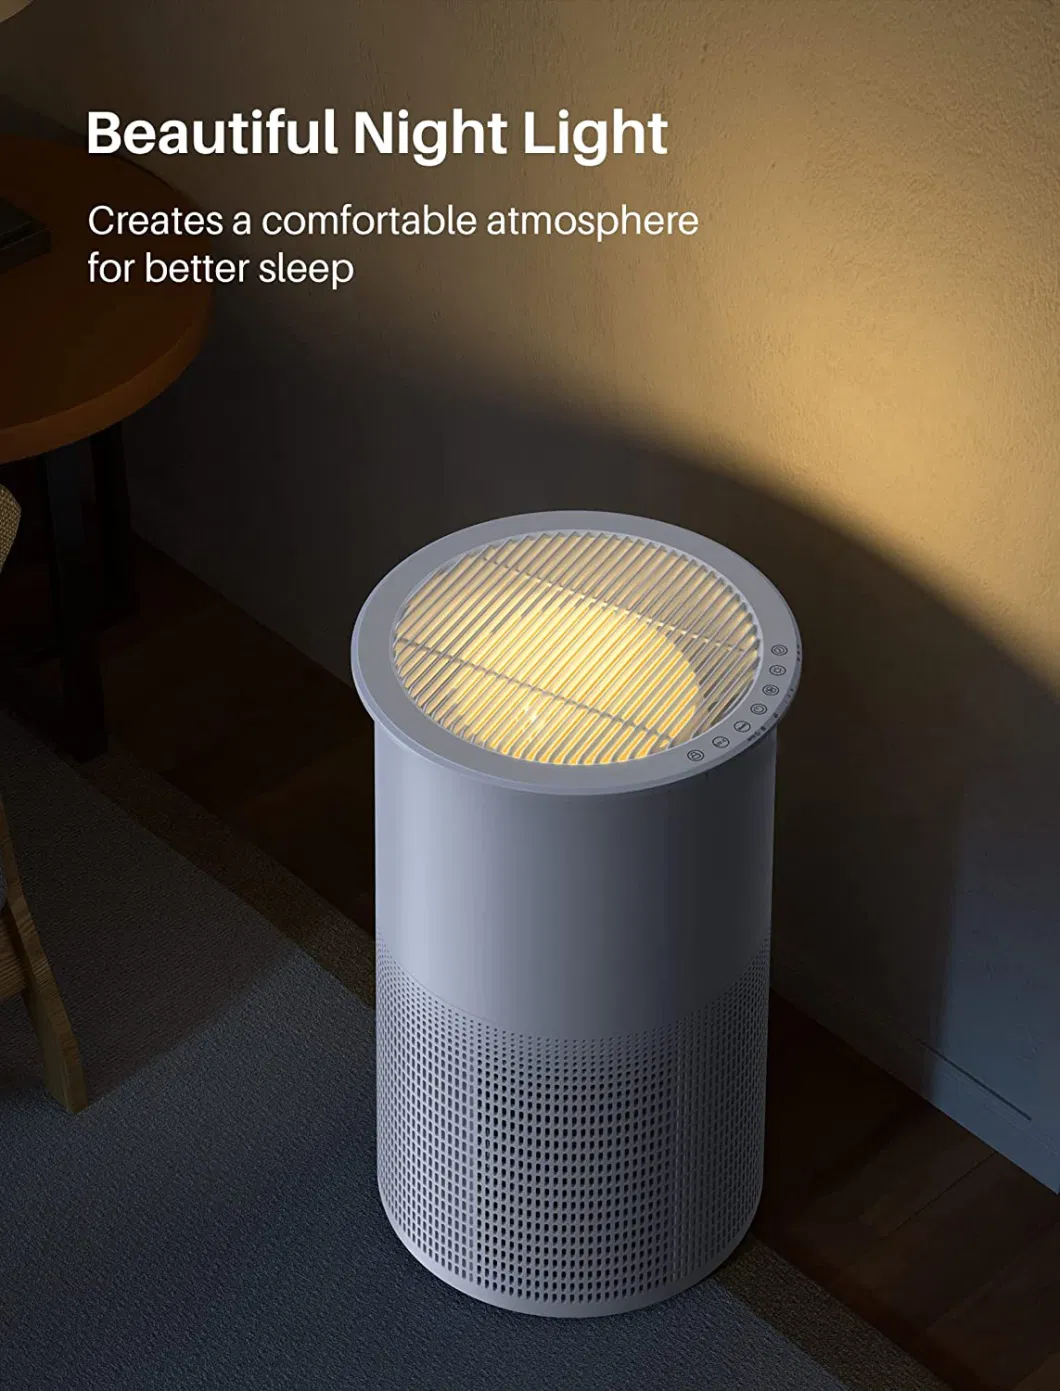 Tower Design Smart Control UV Ture HEPA Air Purifier with Night Light for Pet Smokers Home Appliances